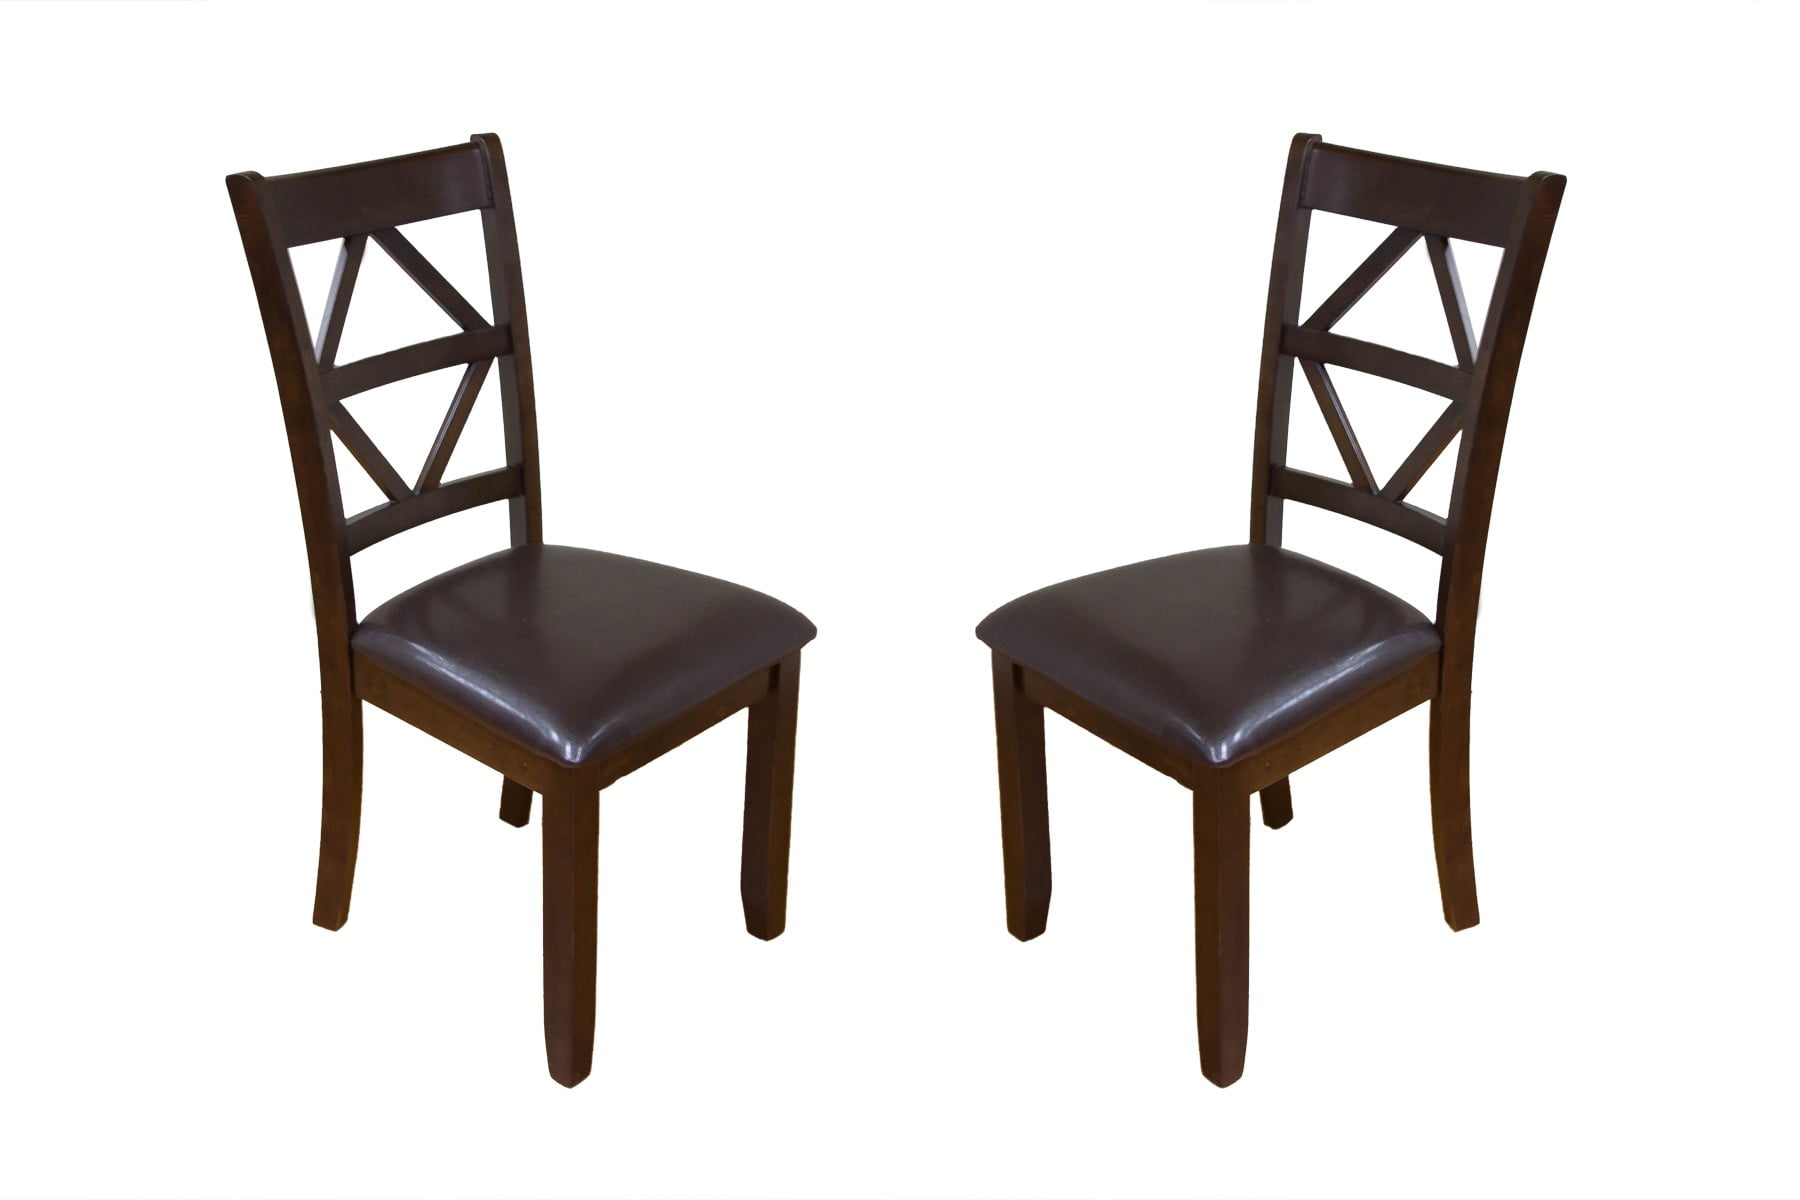 Sturdy Dining Room Chairs For Heavy People